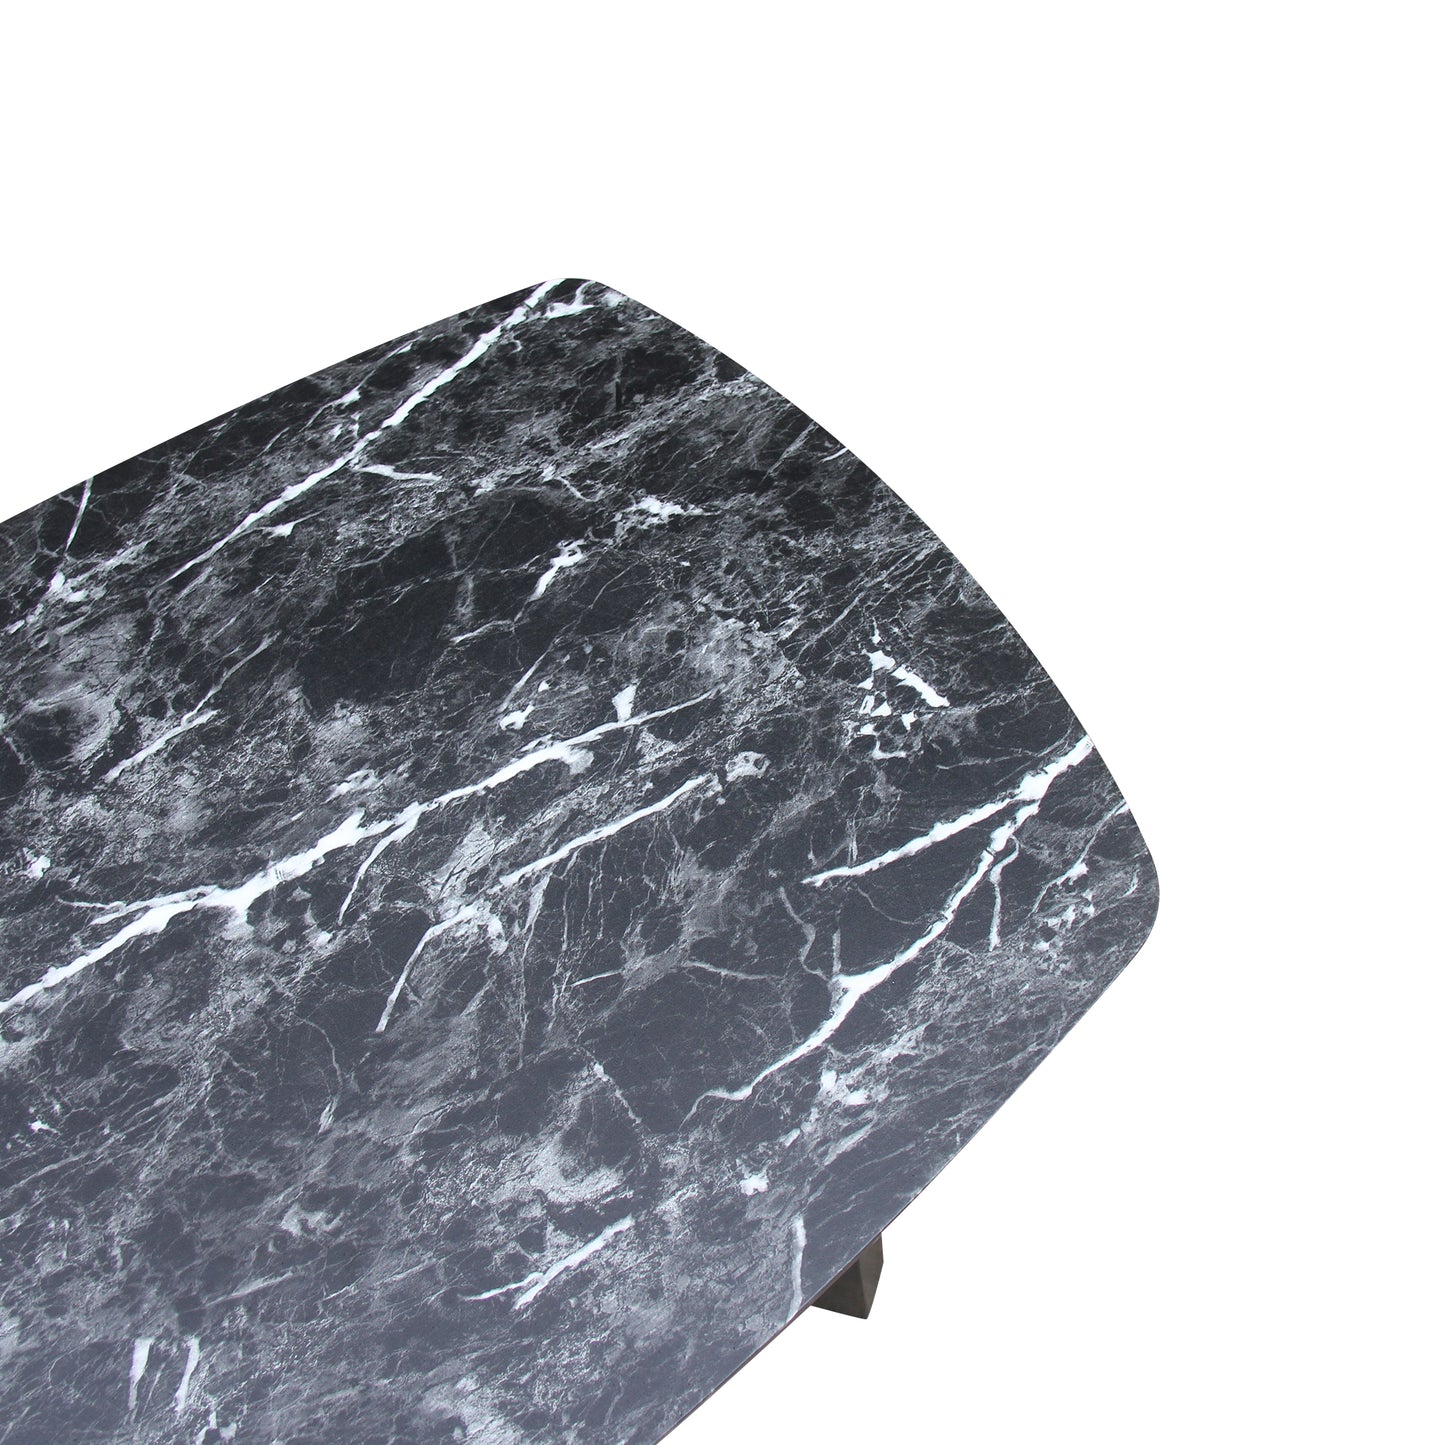 CHOTTO - Kika Rounded Rectangle Coffee Table - Black Marble Color